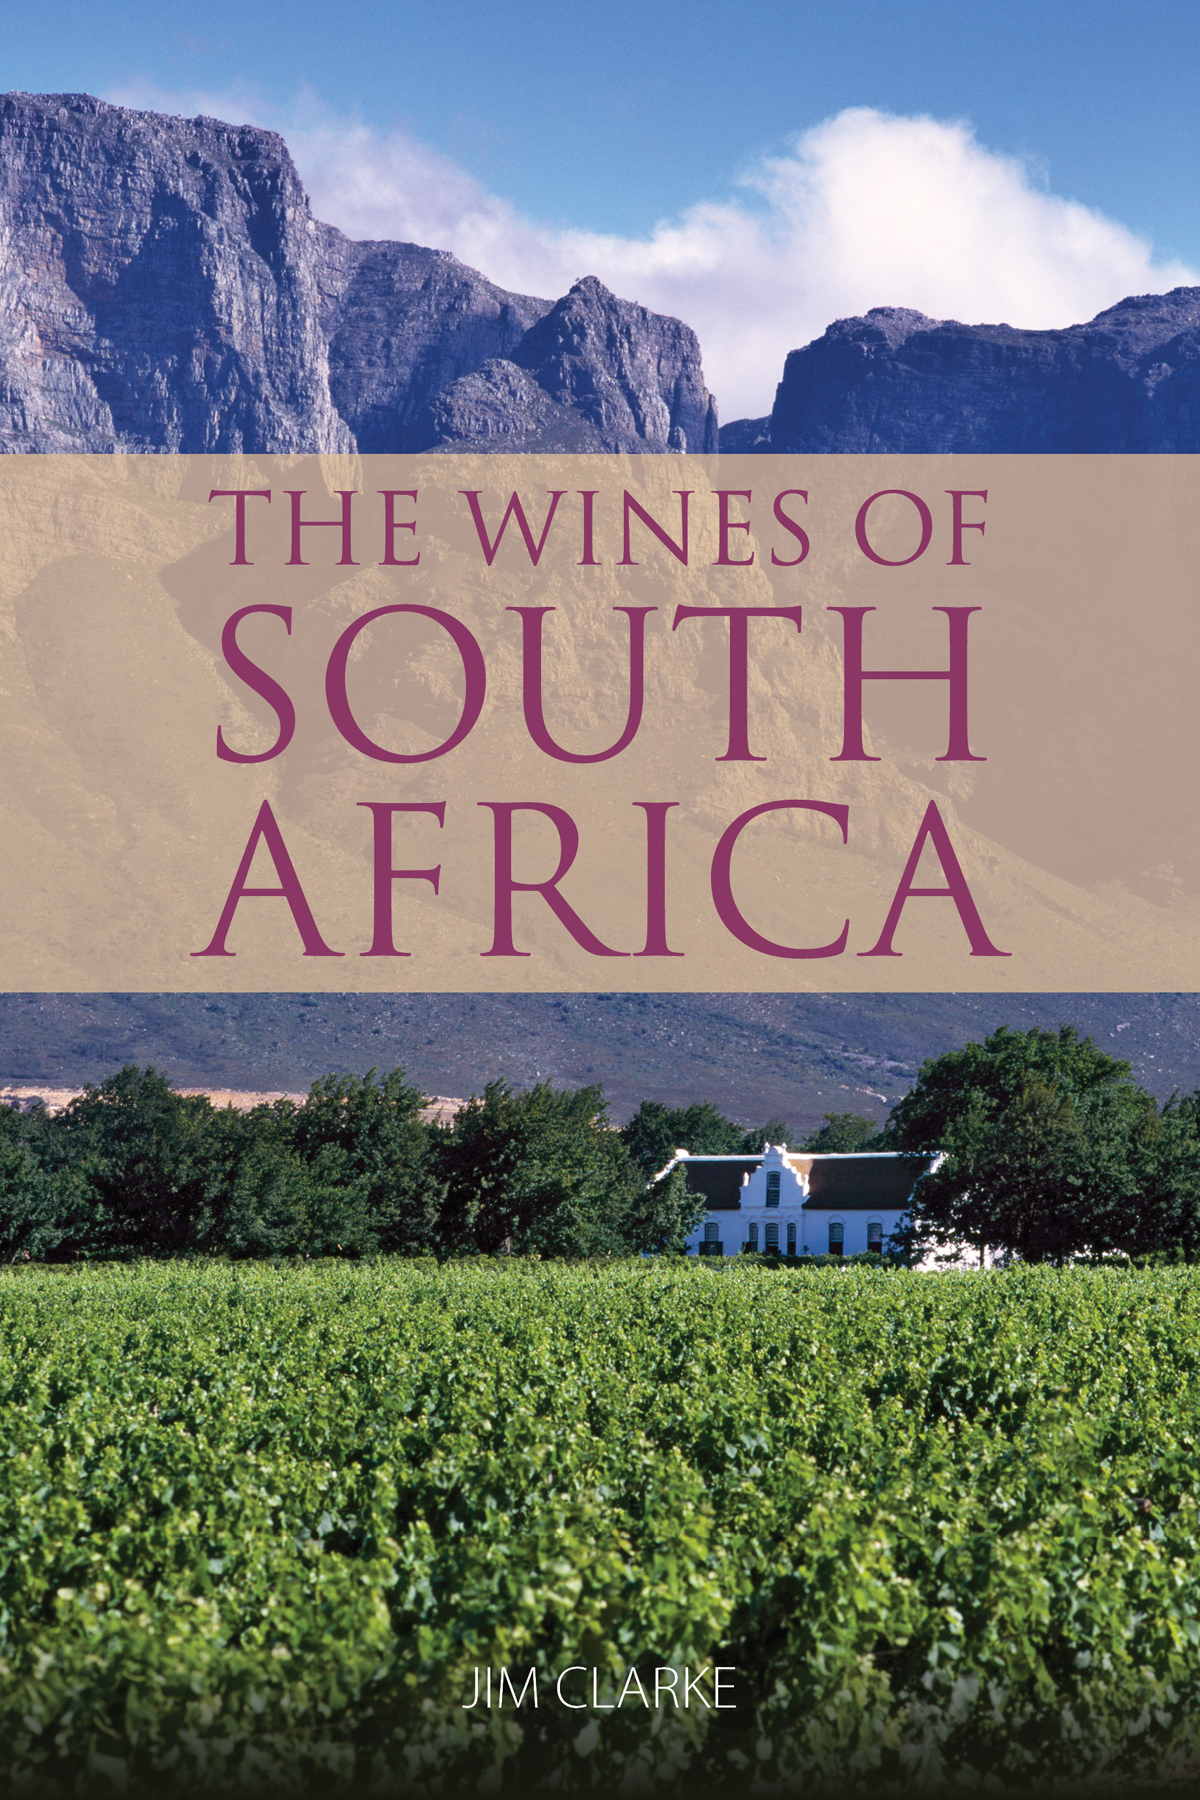 The wines of South Africa